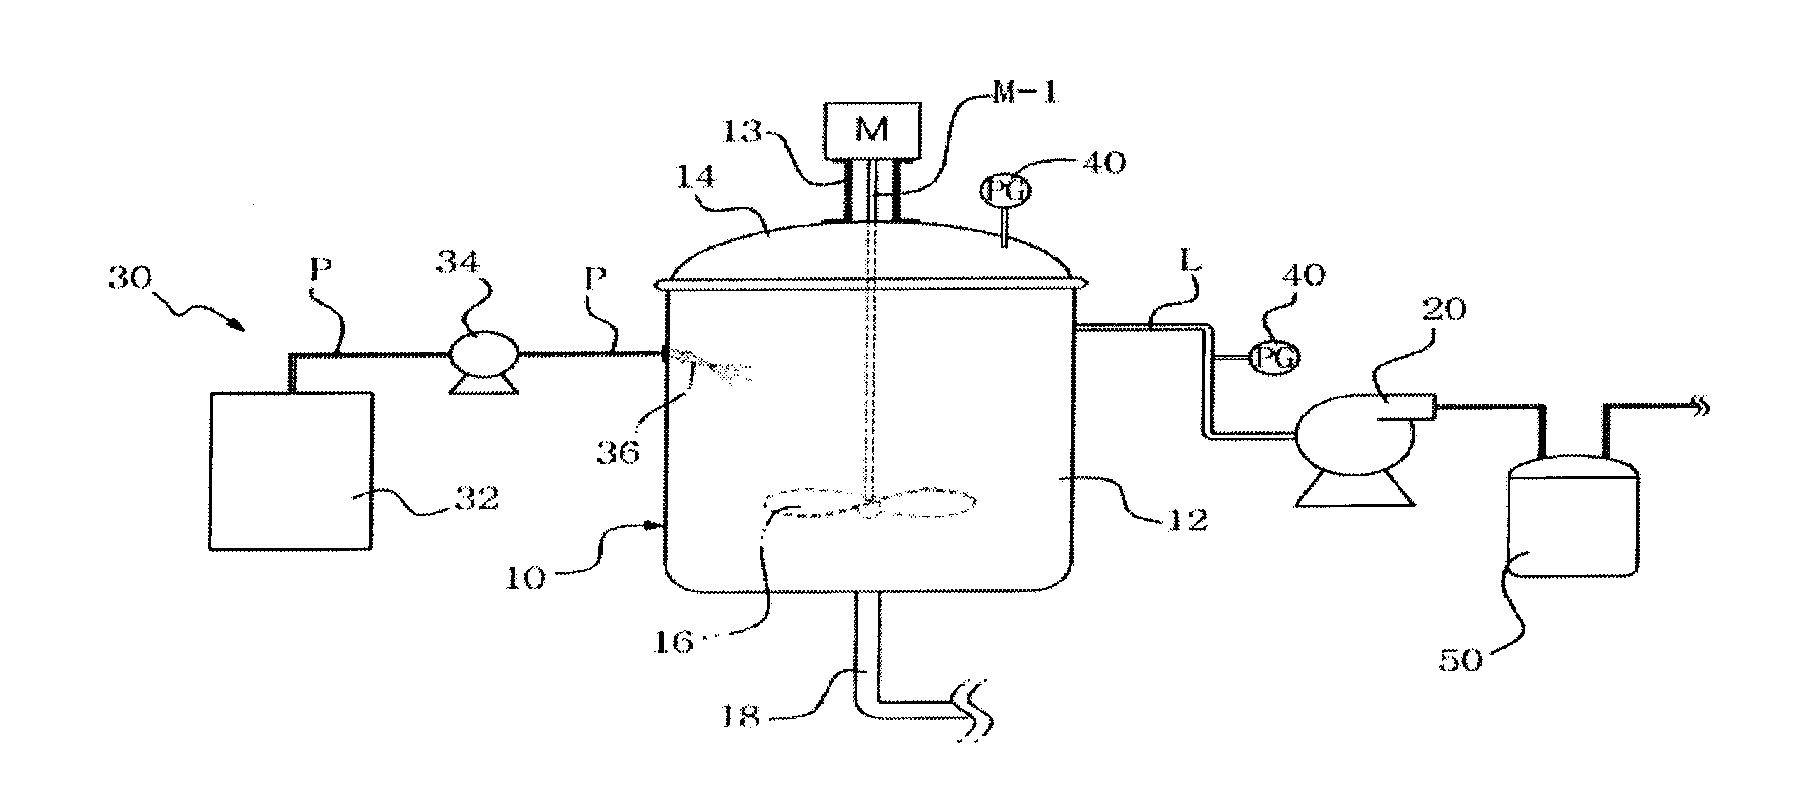 Method For Manufacturing Processed Marine Plant Food